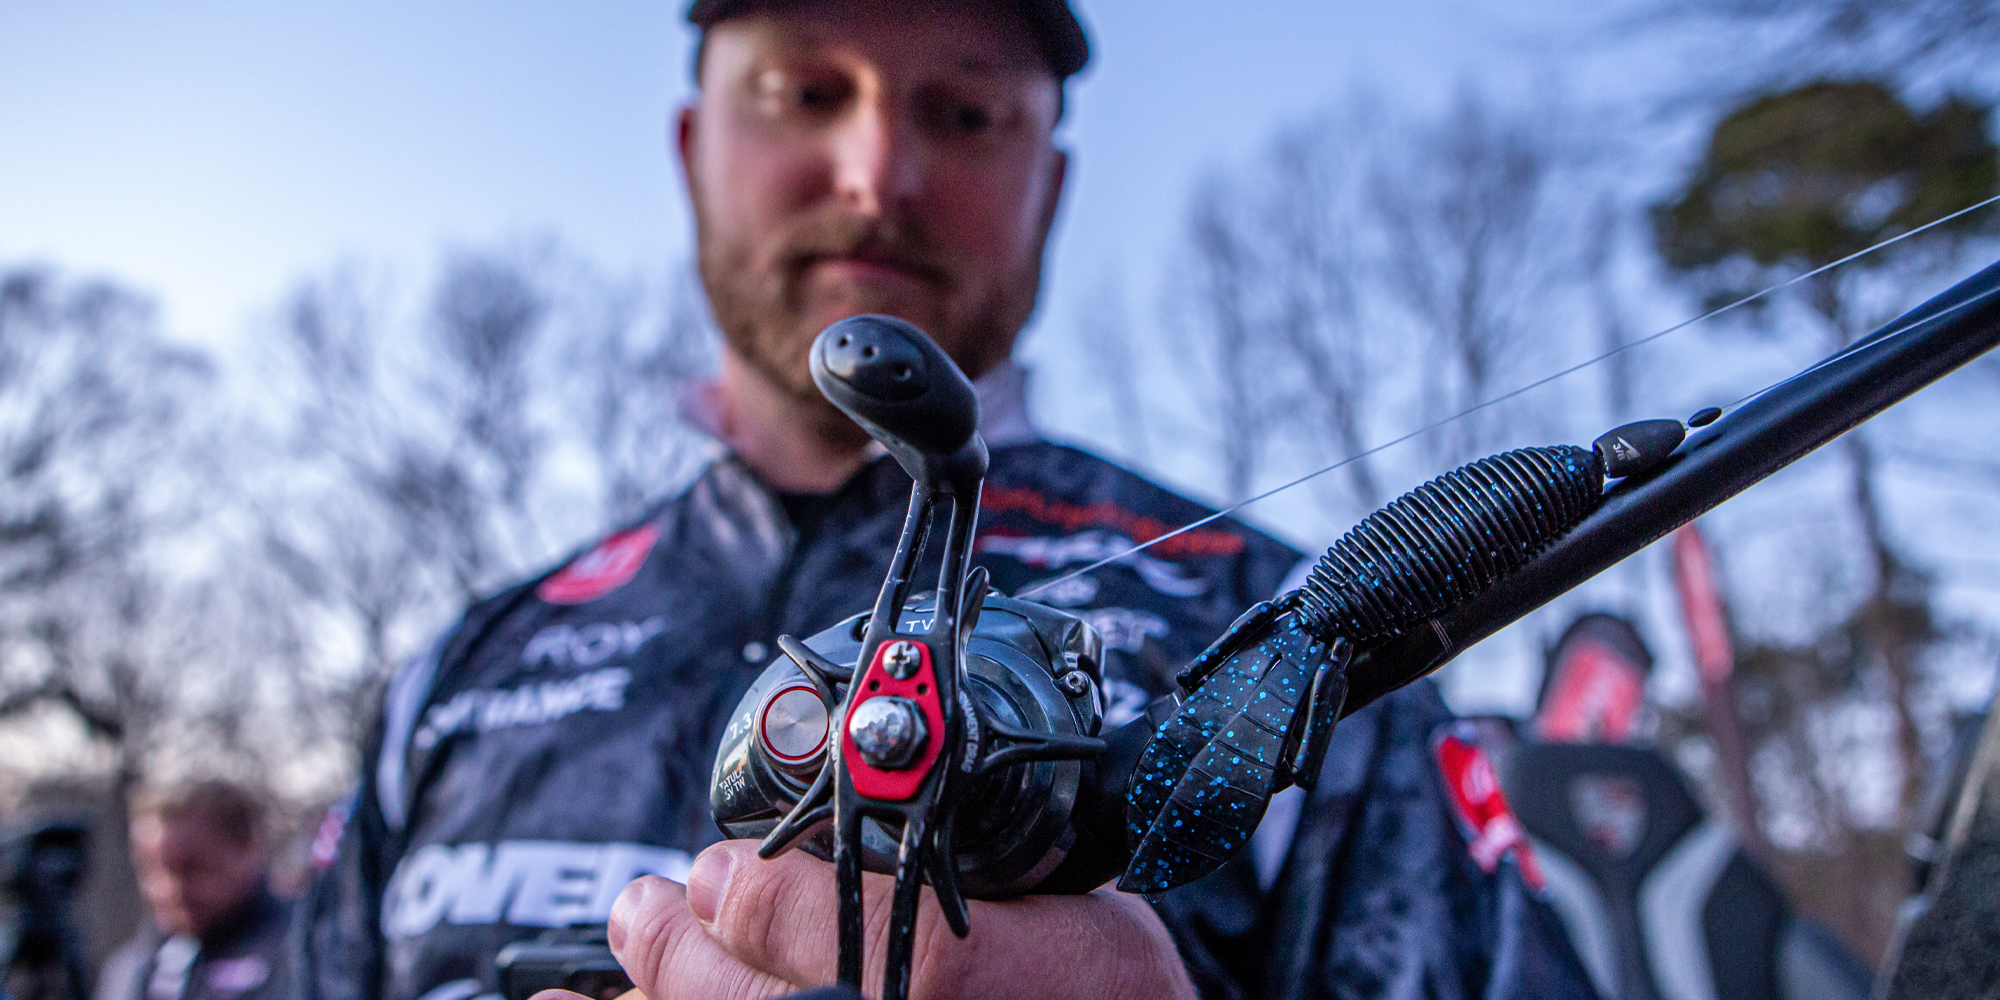 TOP 10 BAITS & PATTERNS: Flipping, Pitching Dominated Bussey Brake Big-Fish  Bite at Stage One - Major League Fishing